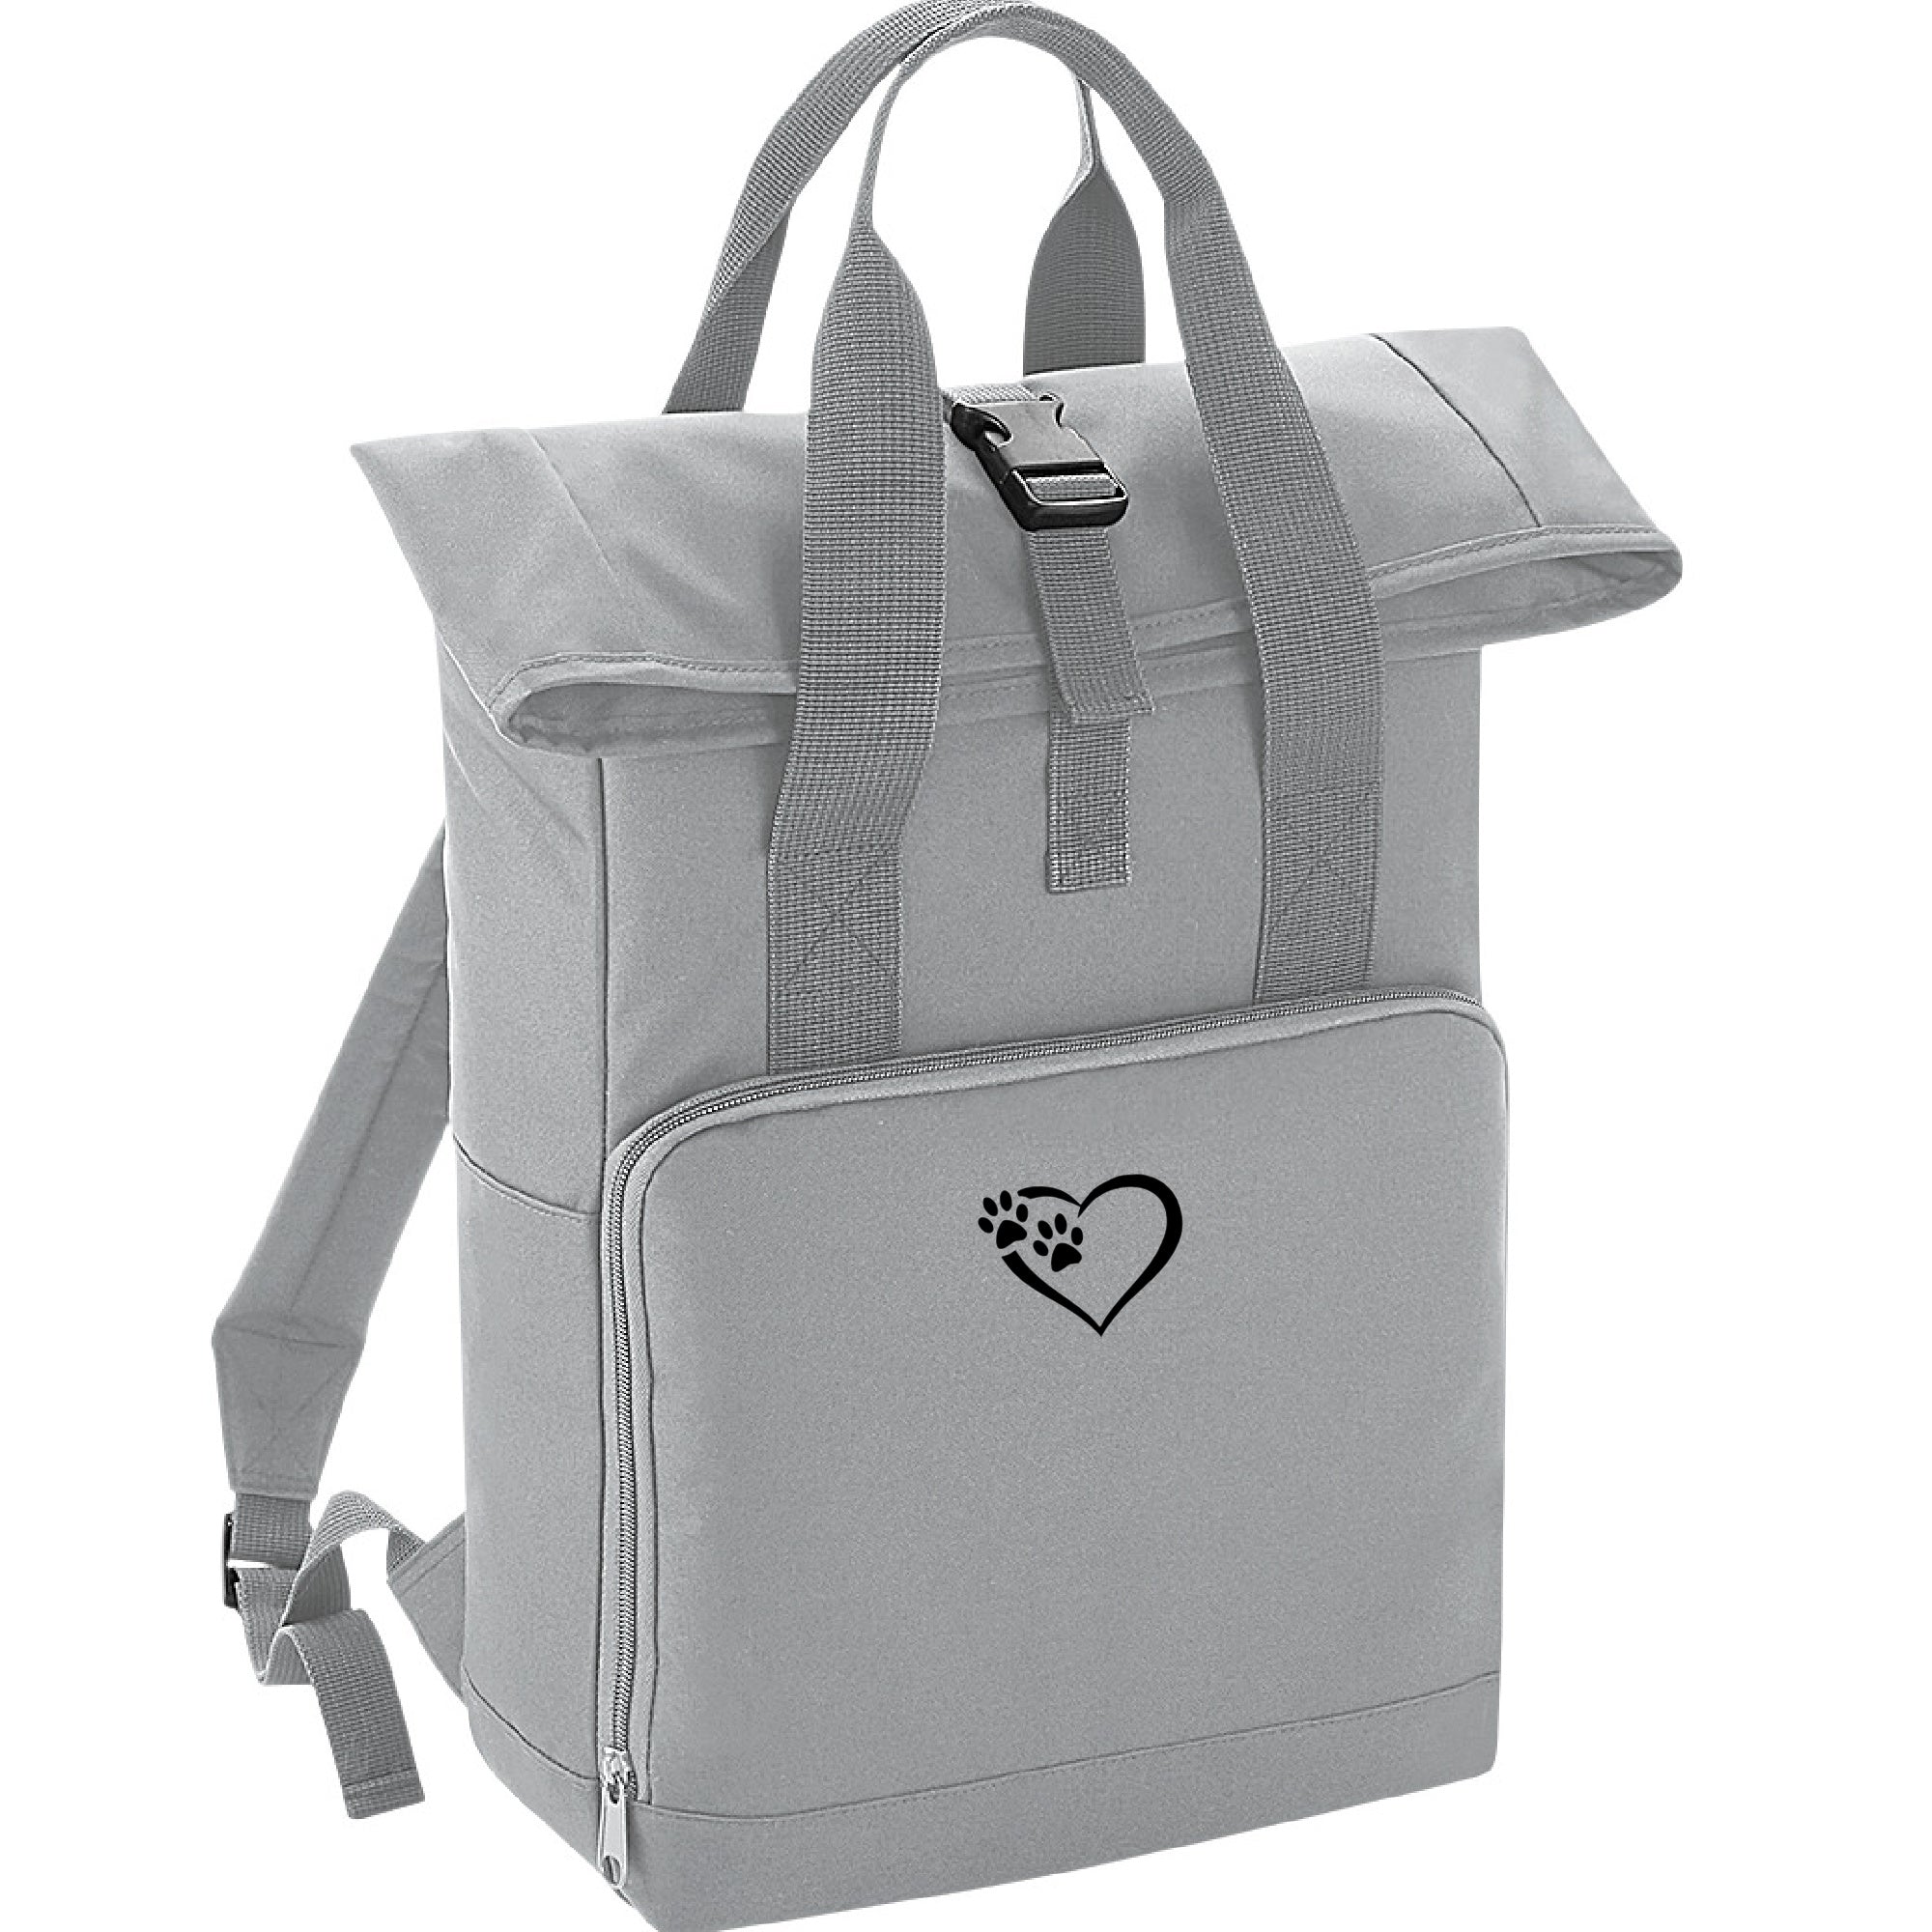 Roll top back pack grey